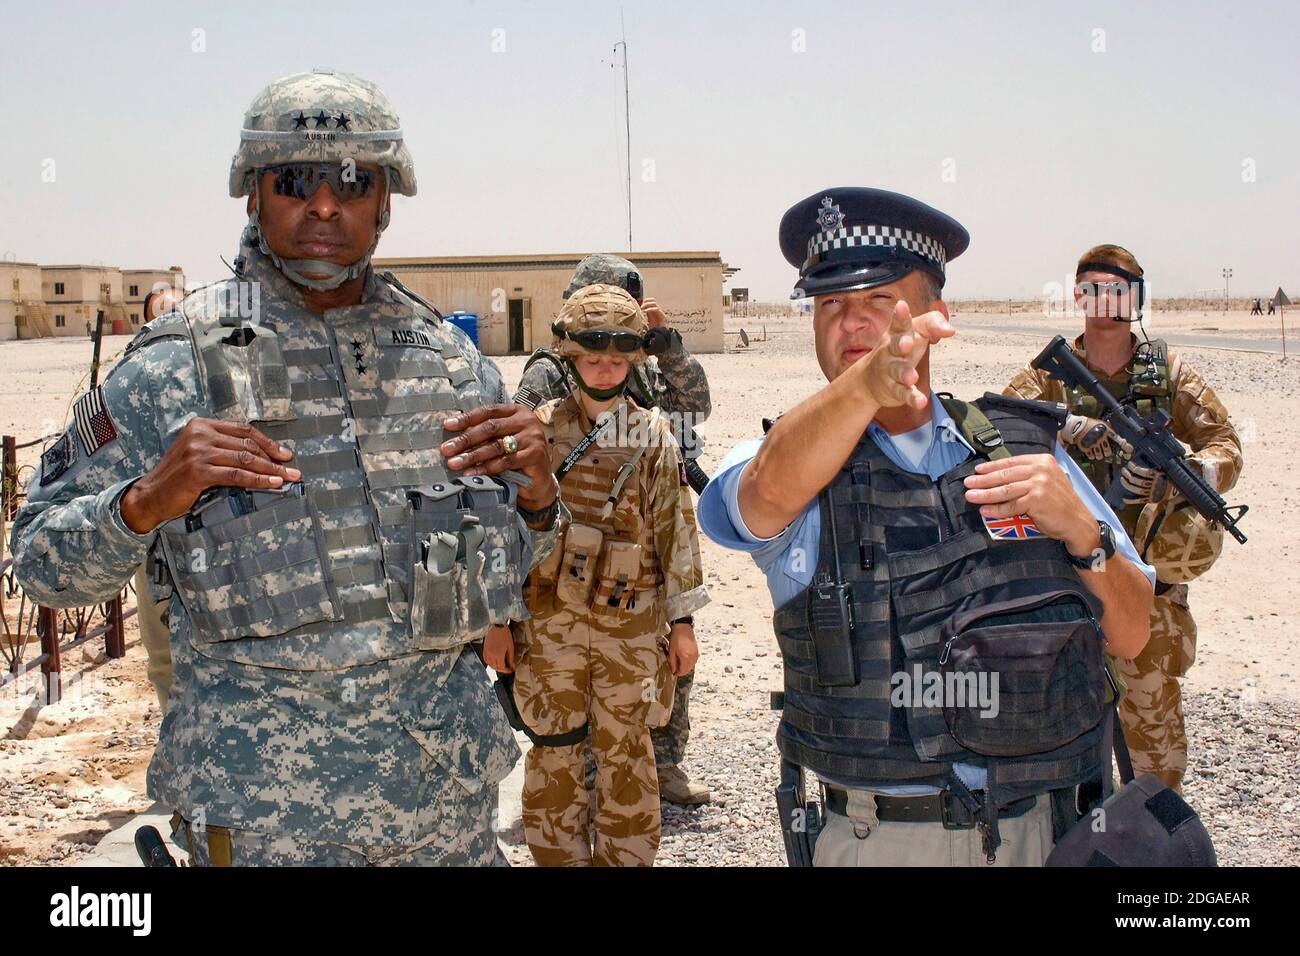 A British Policeman escorts U.S. Army Lt. General Lloyd J. Austin III, left, commander of Multinational Forces Iraq, during a visit to Camp Shaivah May 4, 2008 in Basra, Iraq. Camp Shaivah is home to the Military Transition Team, where Iraqi Police are trained by British Forces. Stock Photo